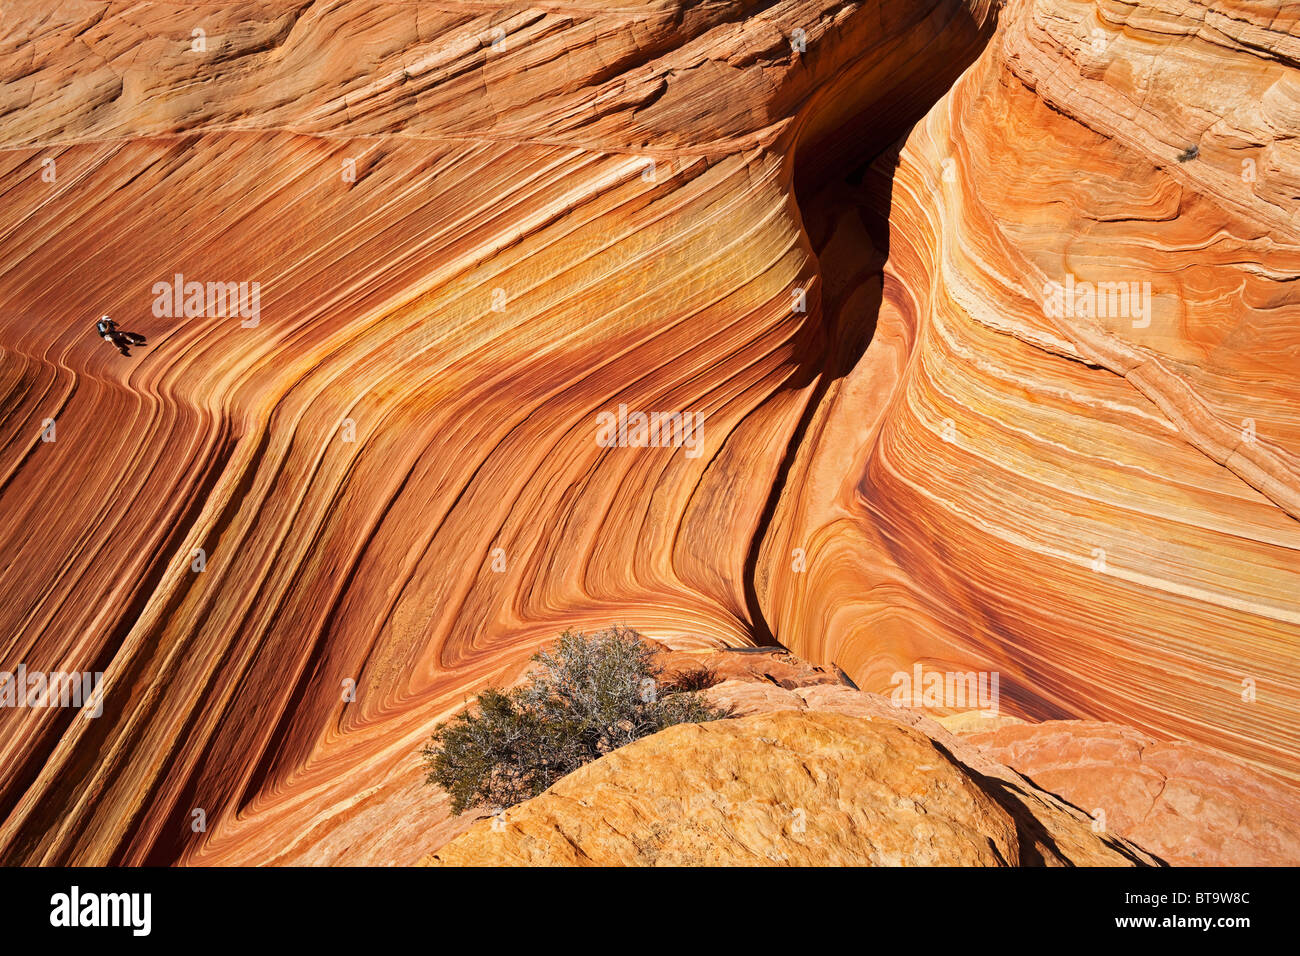 The Wave, rock formation in Coyote Buttes North, Paria Canyon-Vermilion Cliffs Wilderness, Utah, Arizona, USA Stock Photo